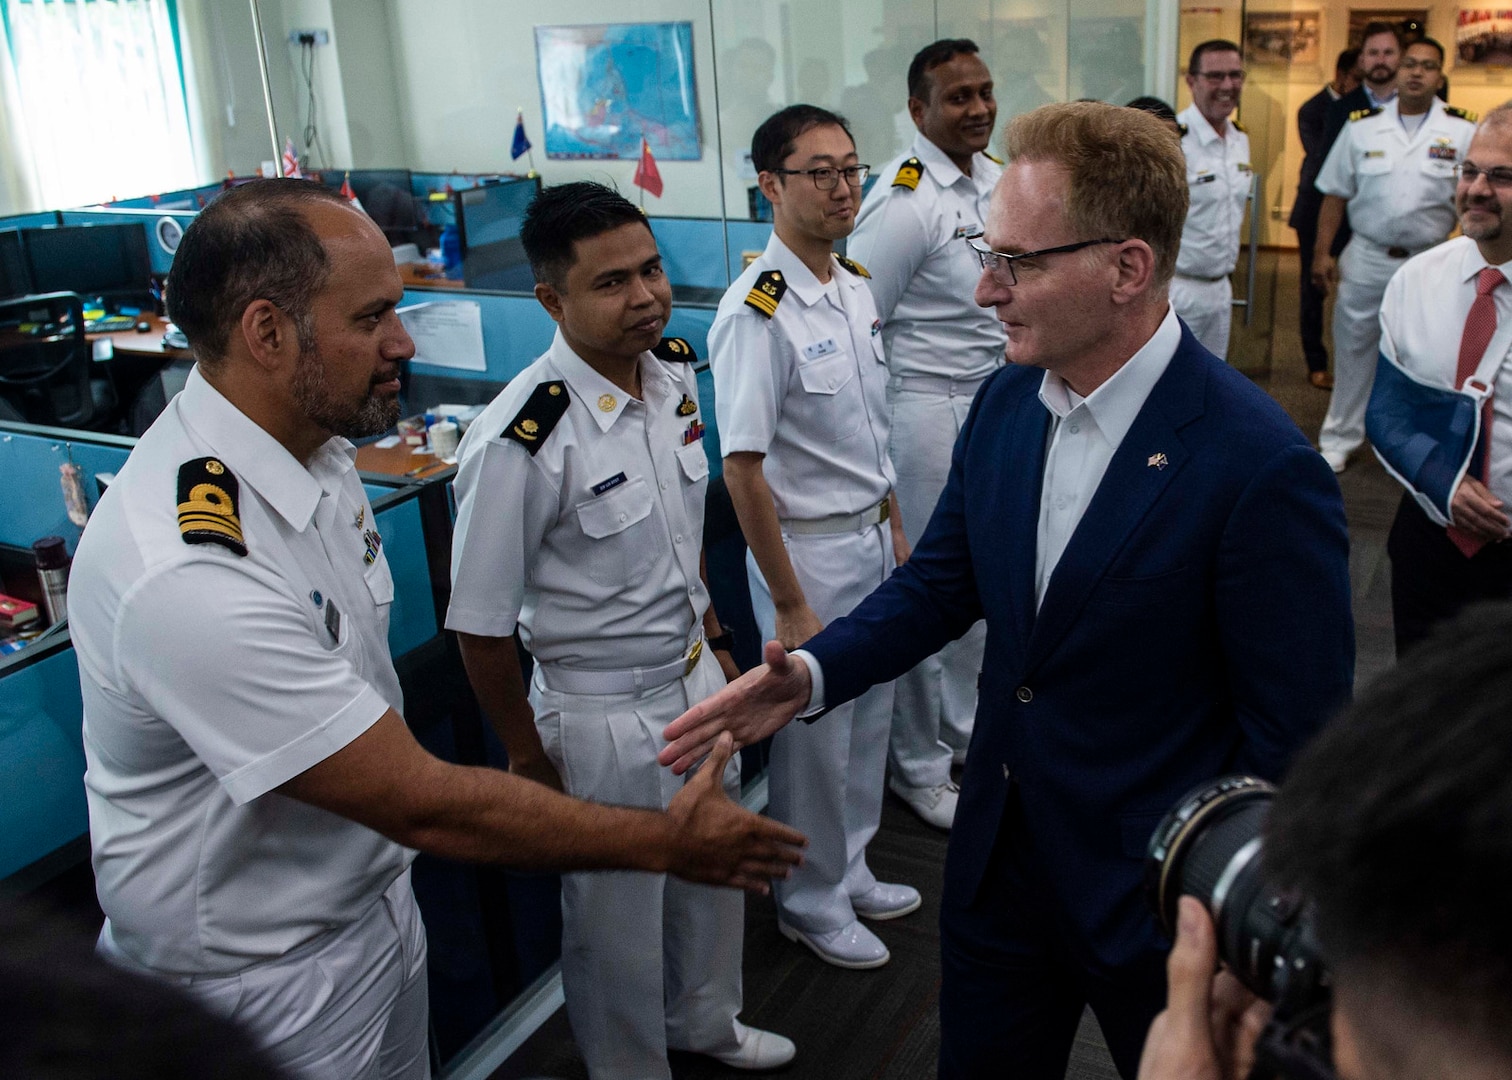 200114-N-FV739-0037\rCHANGI NAVAL BASE, Singapore (Jan. 14, 2019) Acting Secretary of the Navy Thomas B. Modly meets with international liaison officers during a tour of the Information Fusion Centre. Modly�s visit to Singapore is part of a multination visit to the U.S. Indo-Pacific areas of responsibility focused on reinforcing existing partnerships and visiting Sailors and Marines providing forward presence. (U.S. Navy photo by Mass Communication Specialist 2nd Class Christopher Veloicaza/Released)